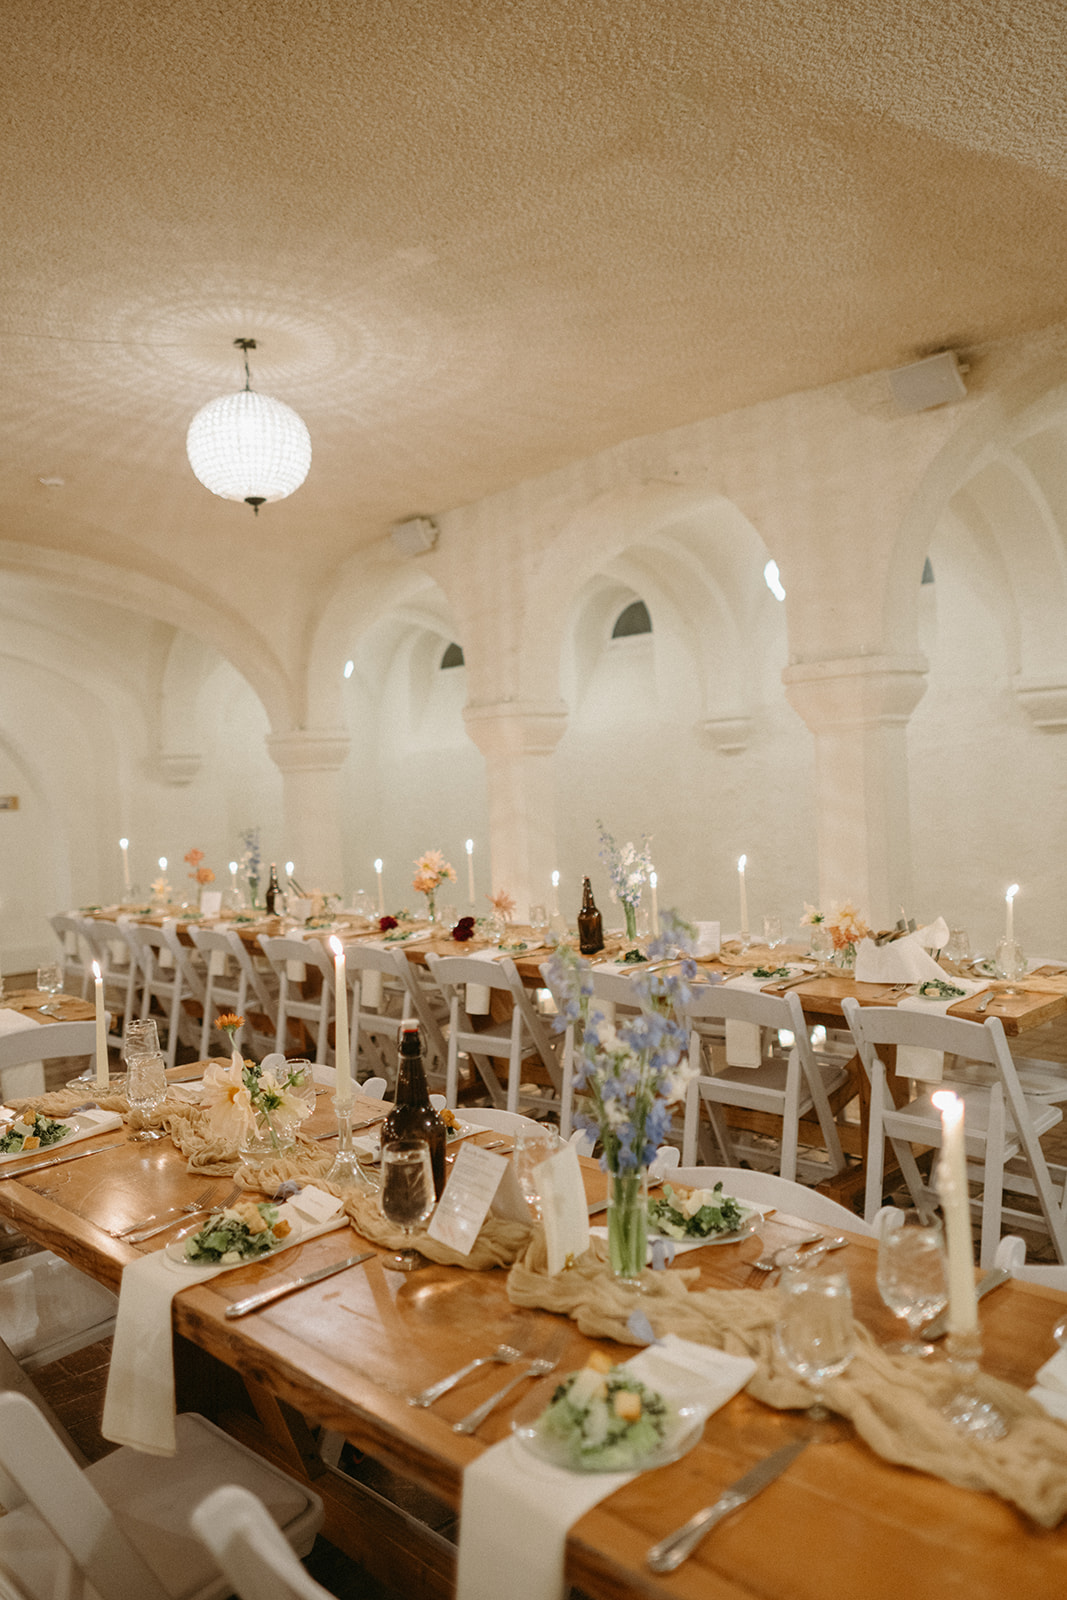 Intimate, timeless, and vintage-inspired wedding in St. Louis at the Boo Cat Club.